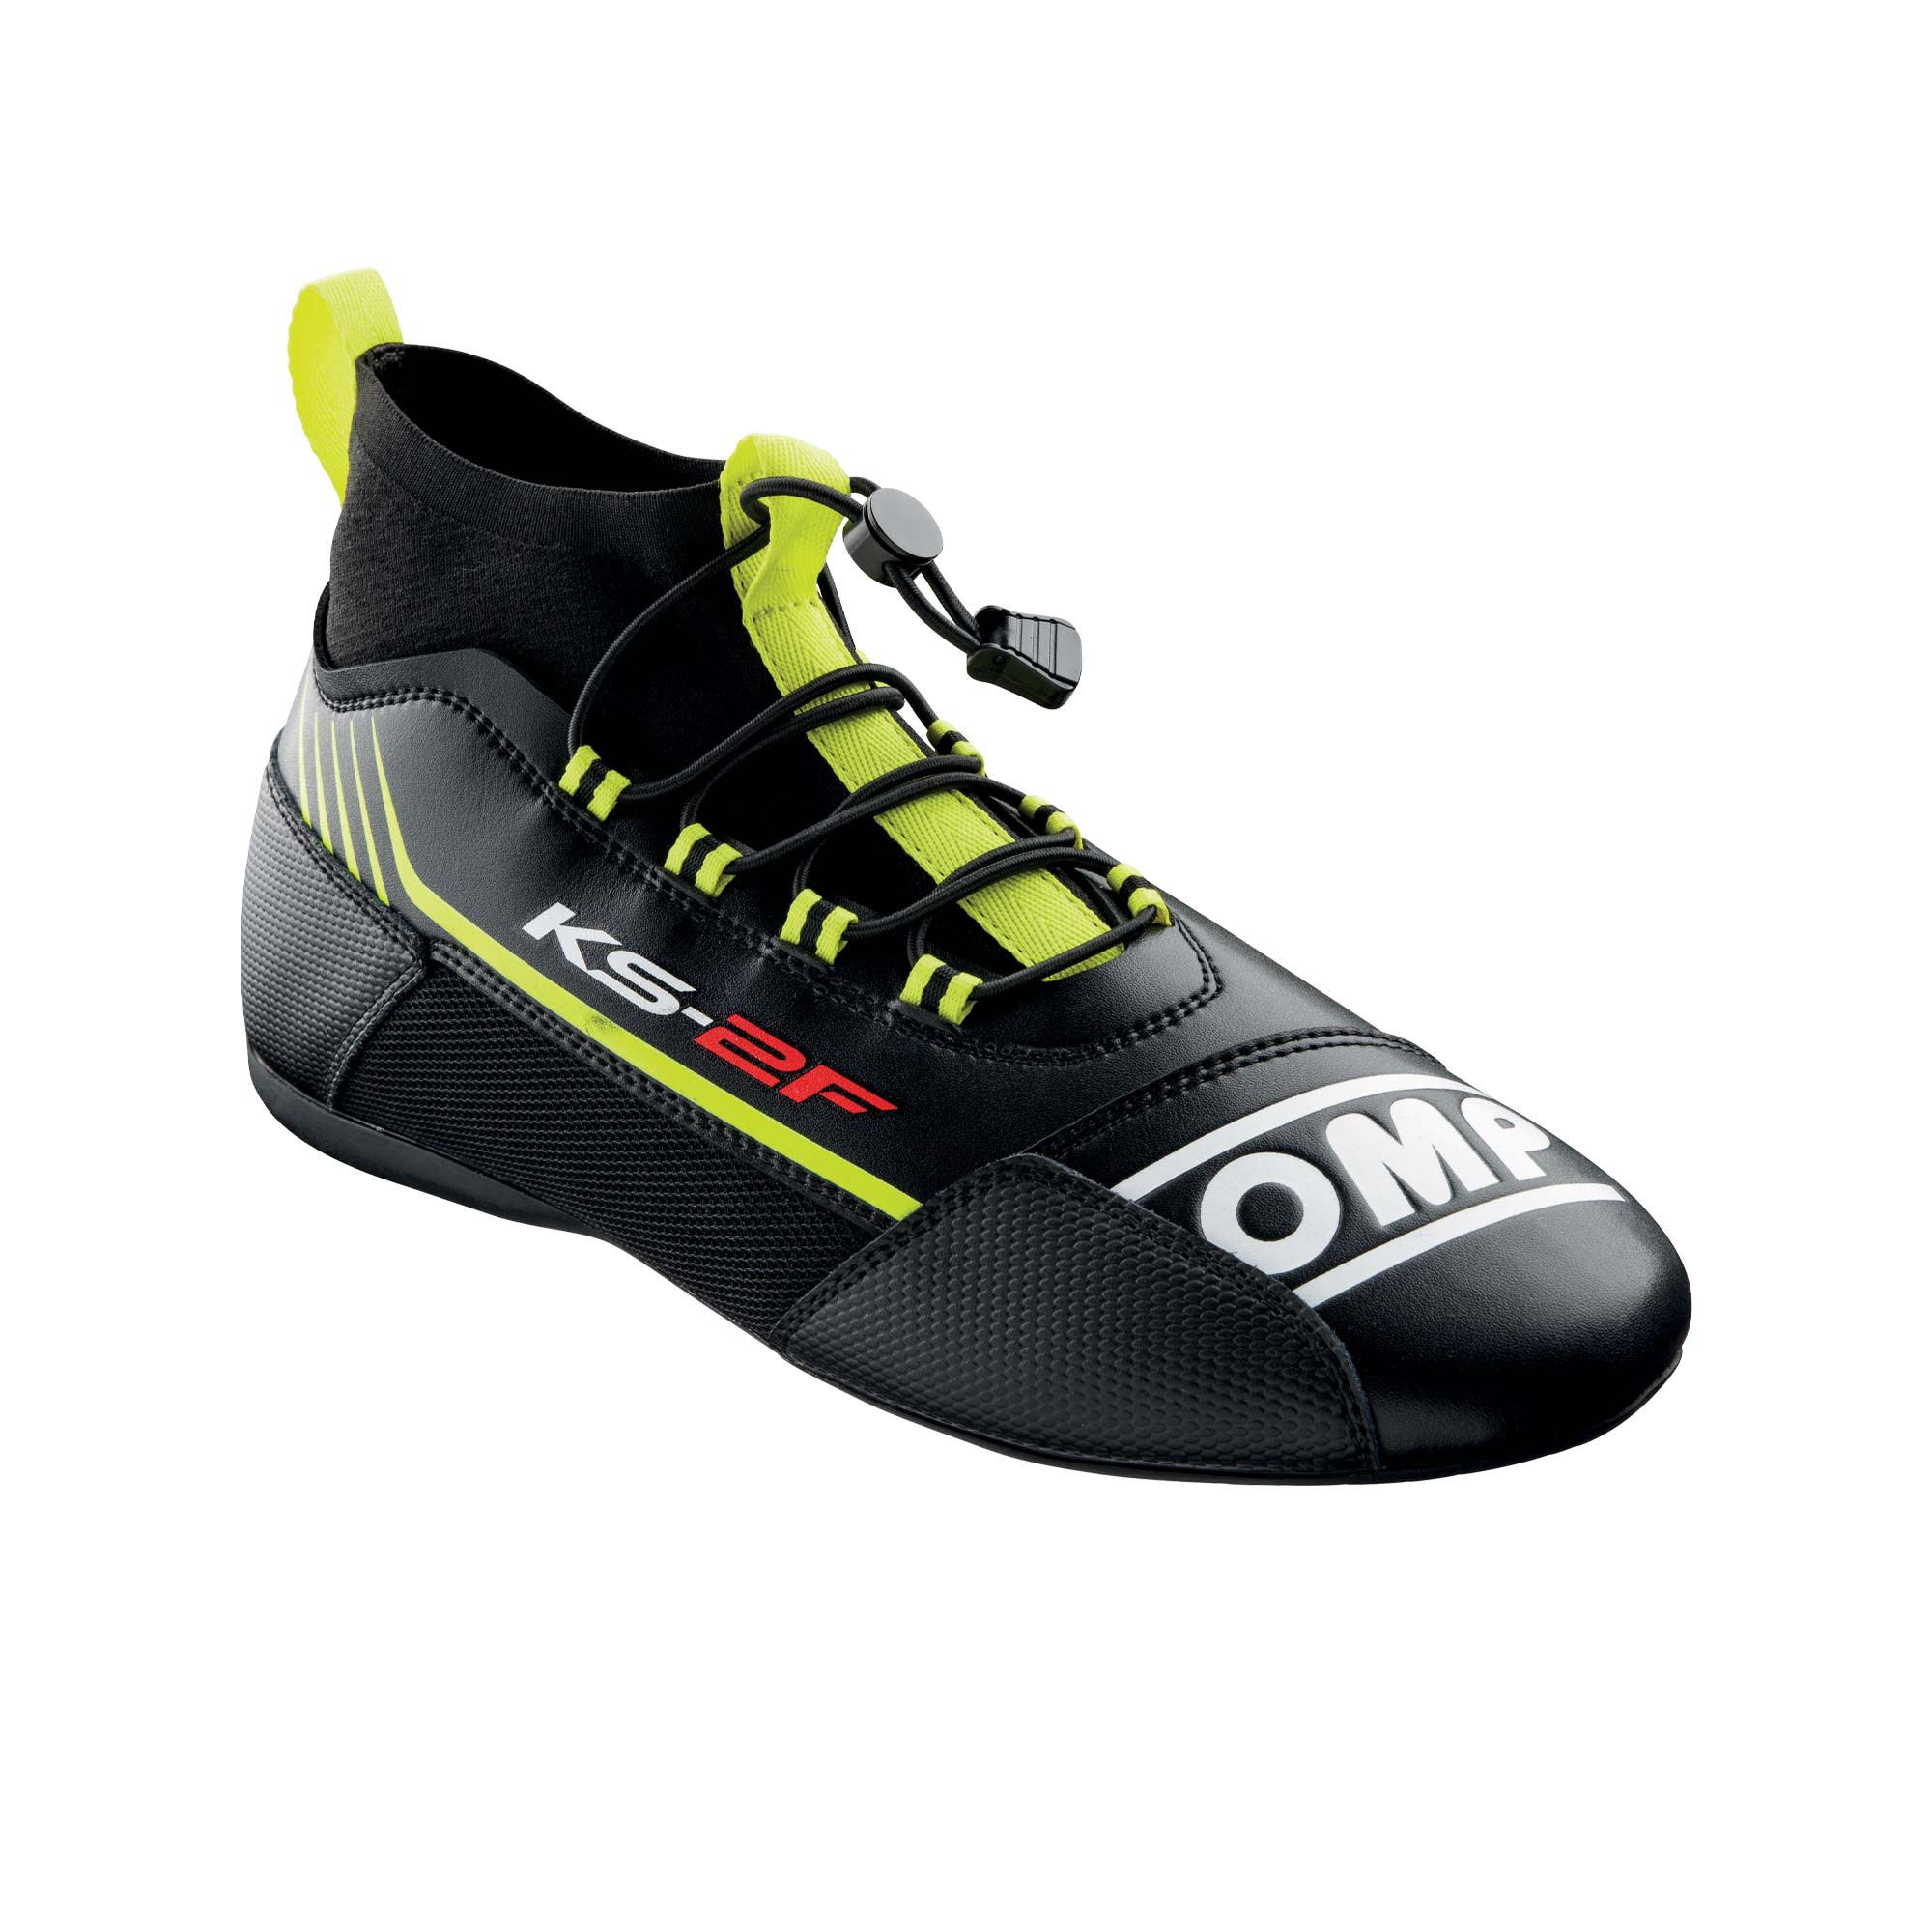 Picture of OMP KS-2F racekart shoes black/neolyellow